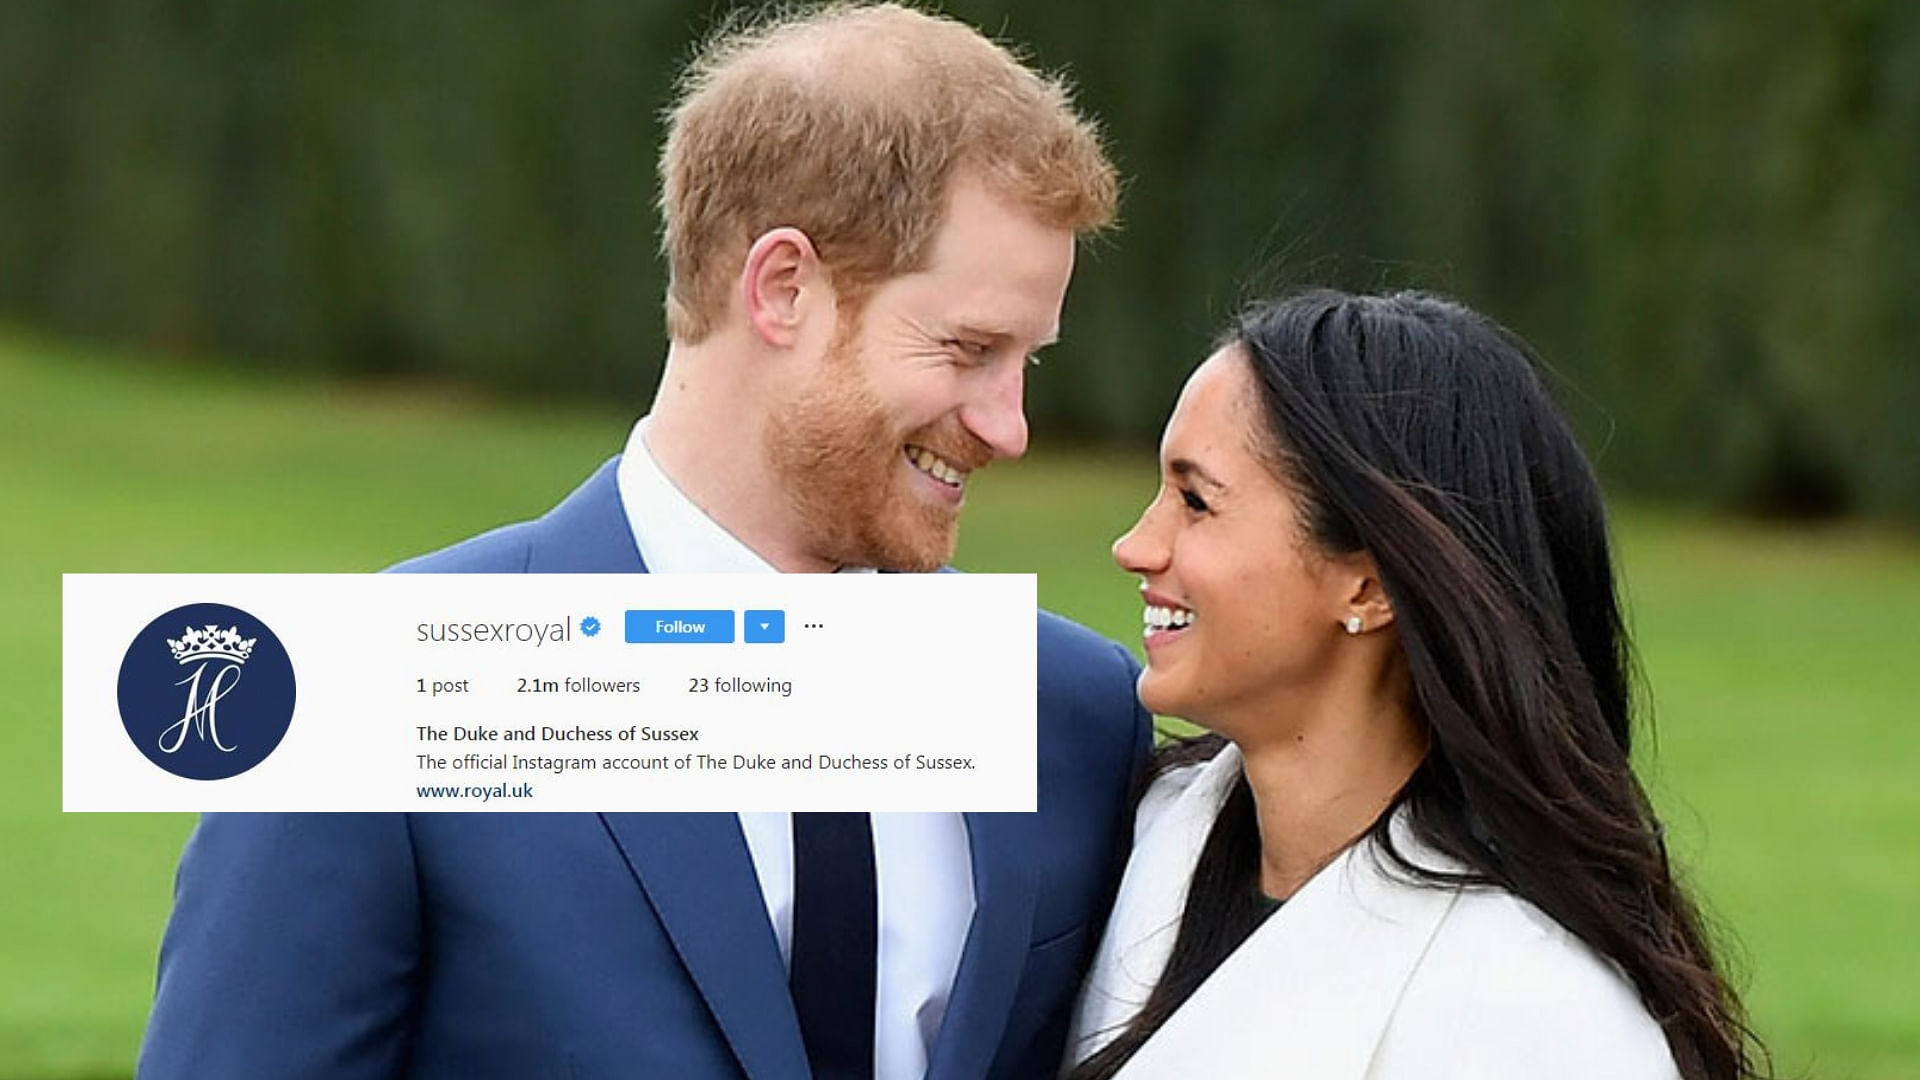 Prince Harry and Meghan Markle are now on Instagram at <a href="https://www.instagram.com/sussexroyal/">@SussexRoyal</a>.